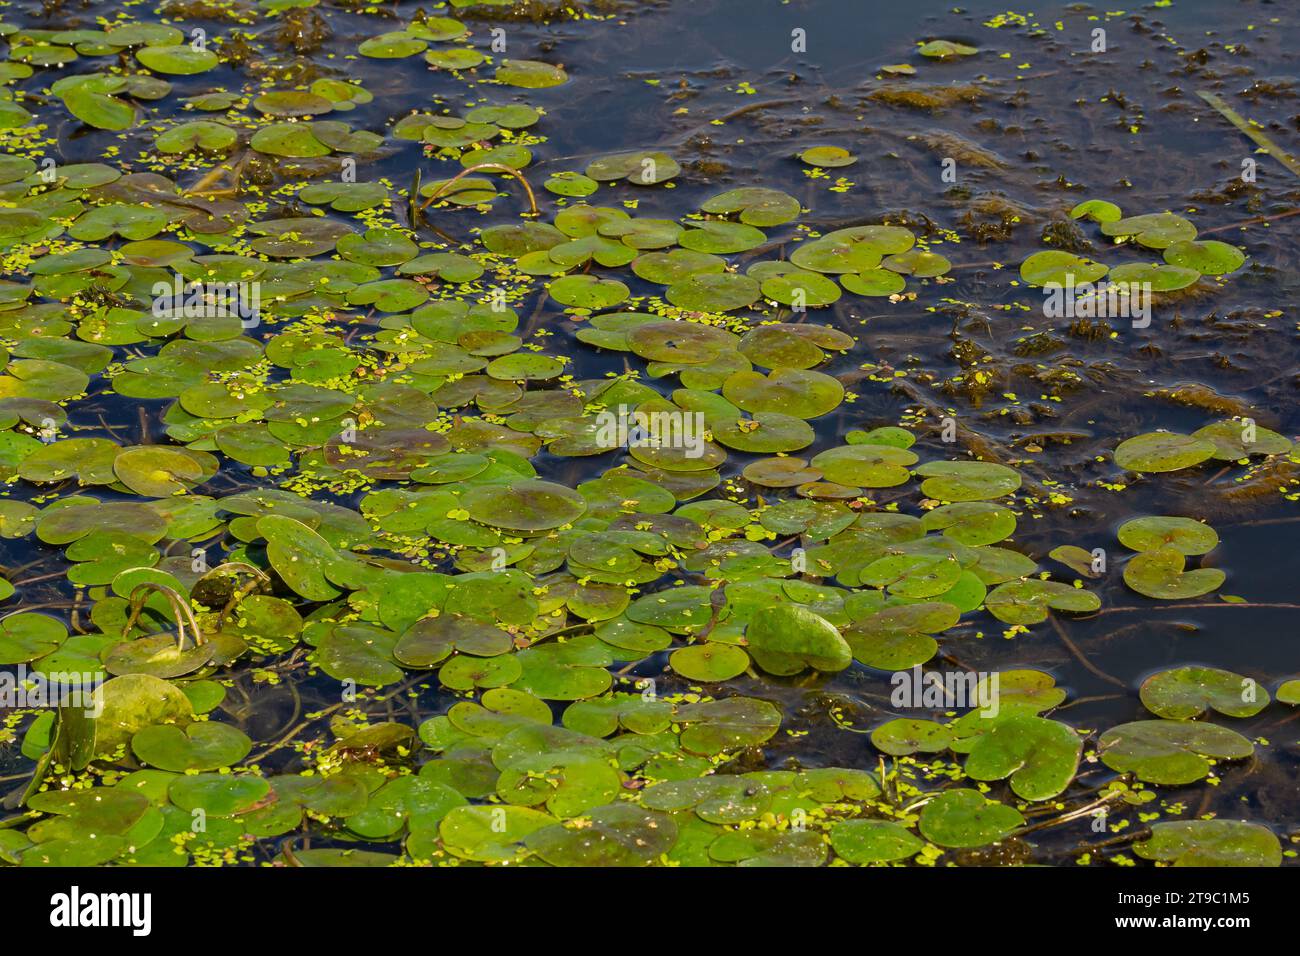 Hydrocharis morsus-ranae, frogbit, is a flowering plant belonging to the genus Hydrocharis in the family Hydrocharitaceae. It is a small floating plan Stock Photo